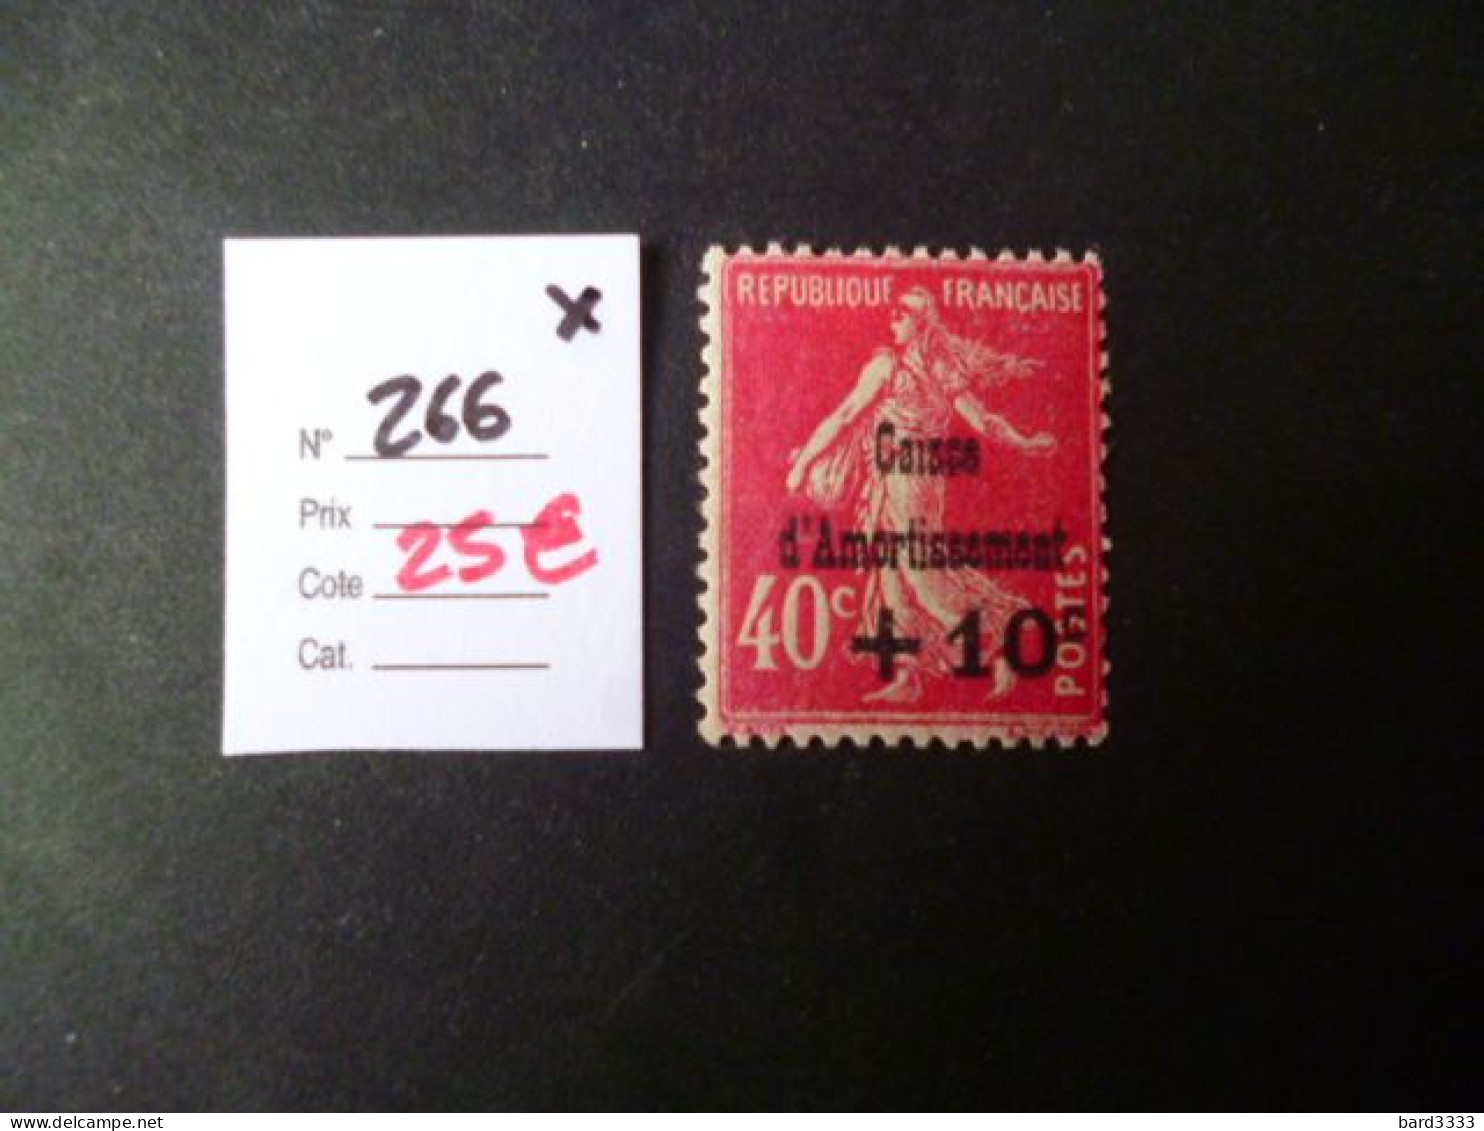 Timbre France Neuf * Caisse Amortissement N° 266 Cote 25  € - Ungebraucht